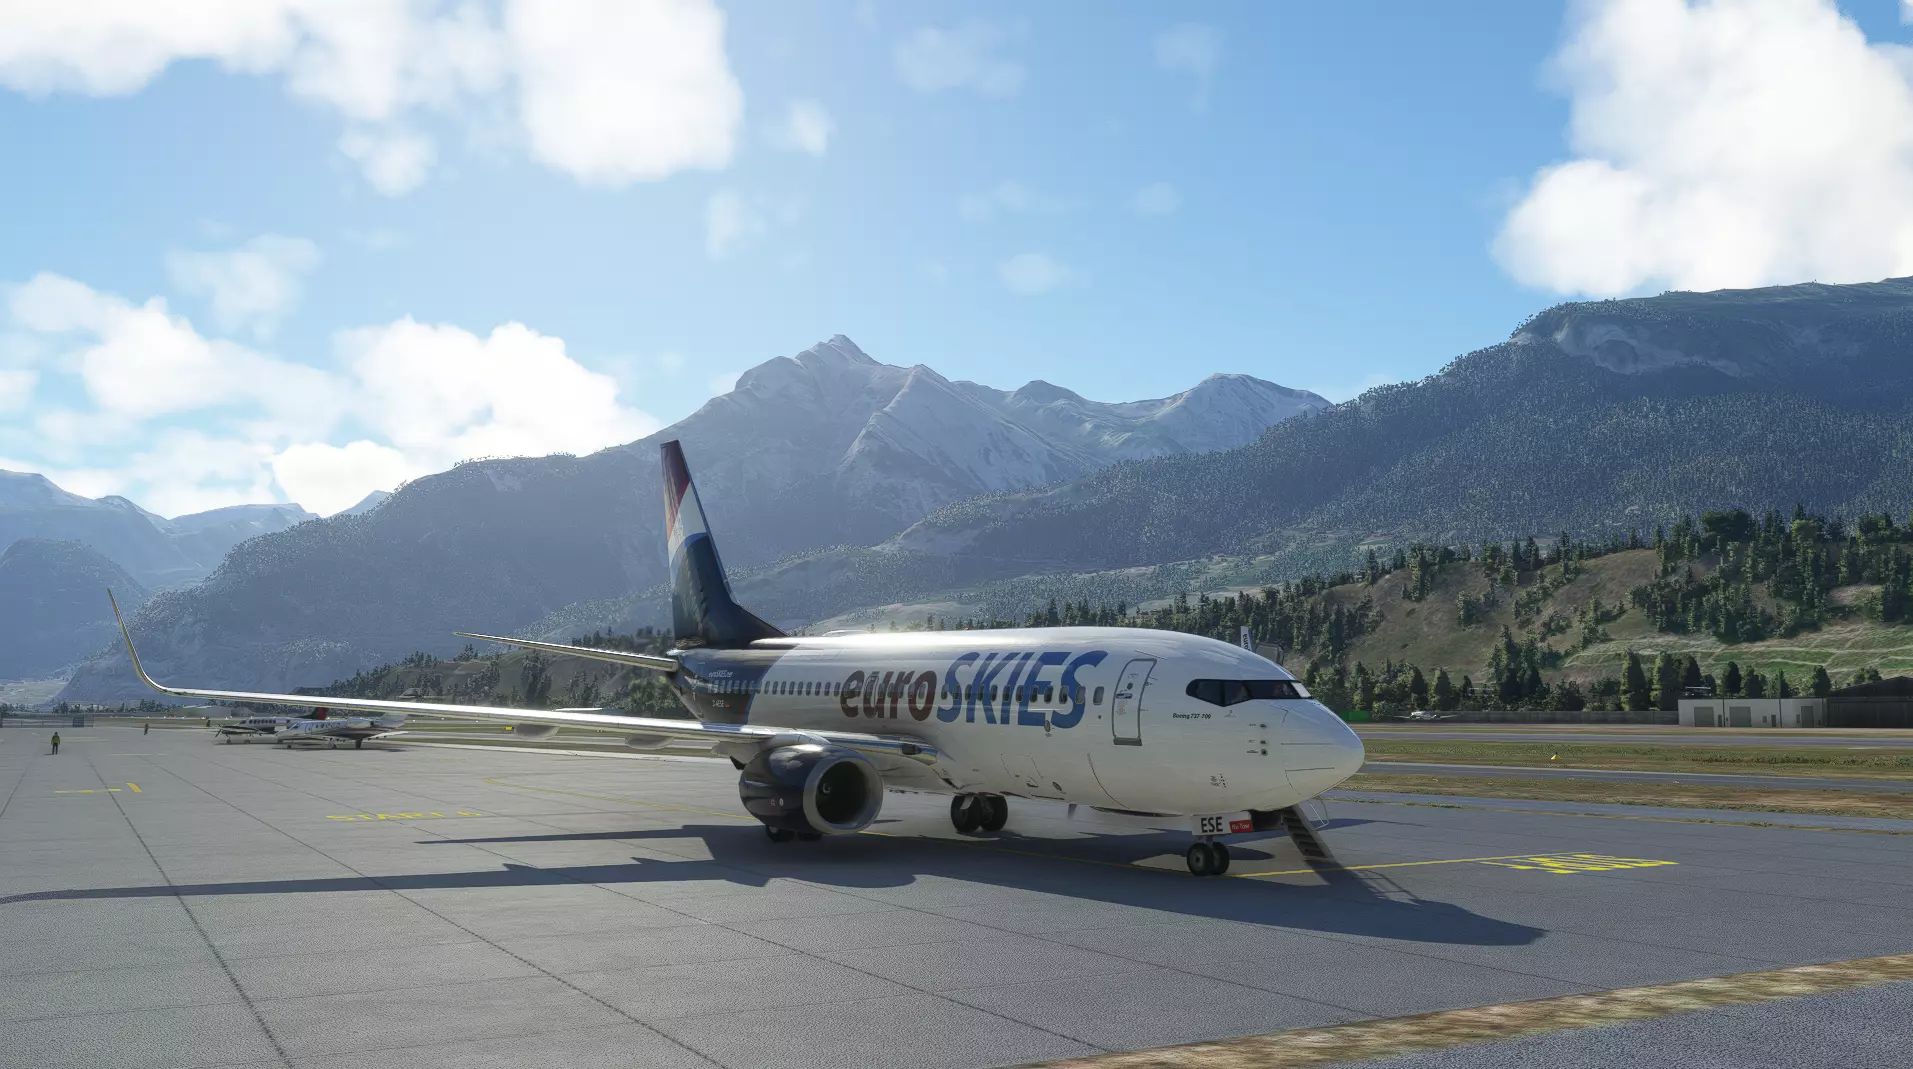 euroSKIES virtual airline boeing on ground operations in front of mountain ridge